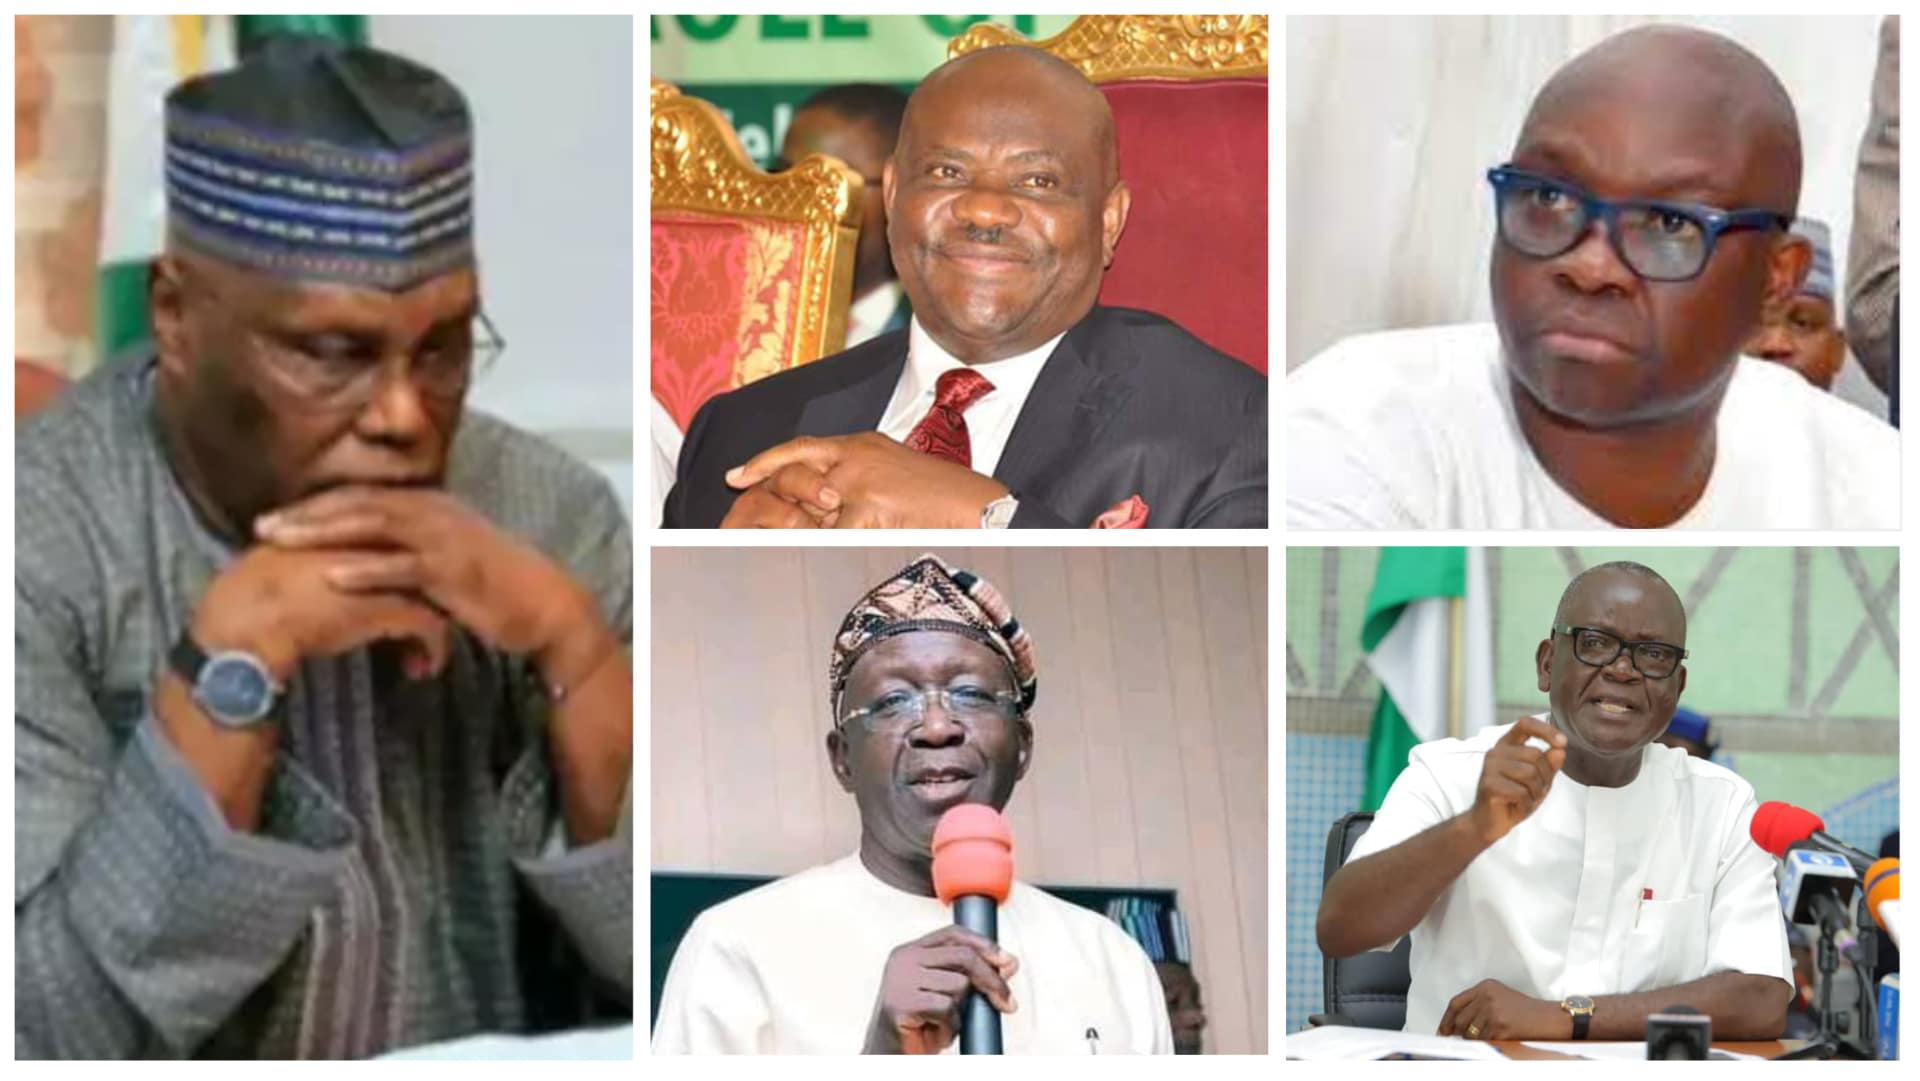 Latest Political News In Nigeria For Today, Thursday, 30th June, 2022